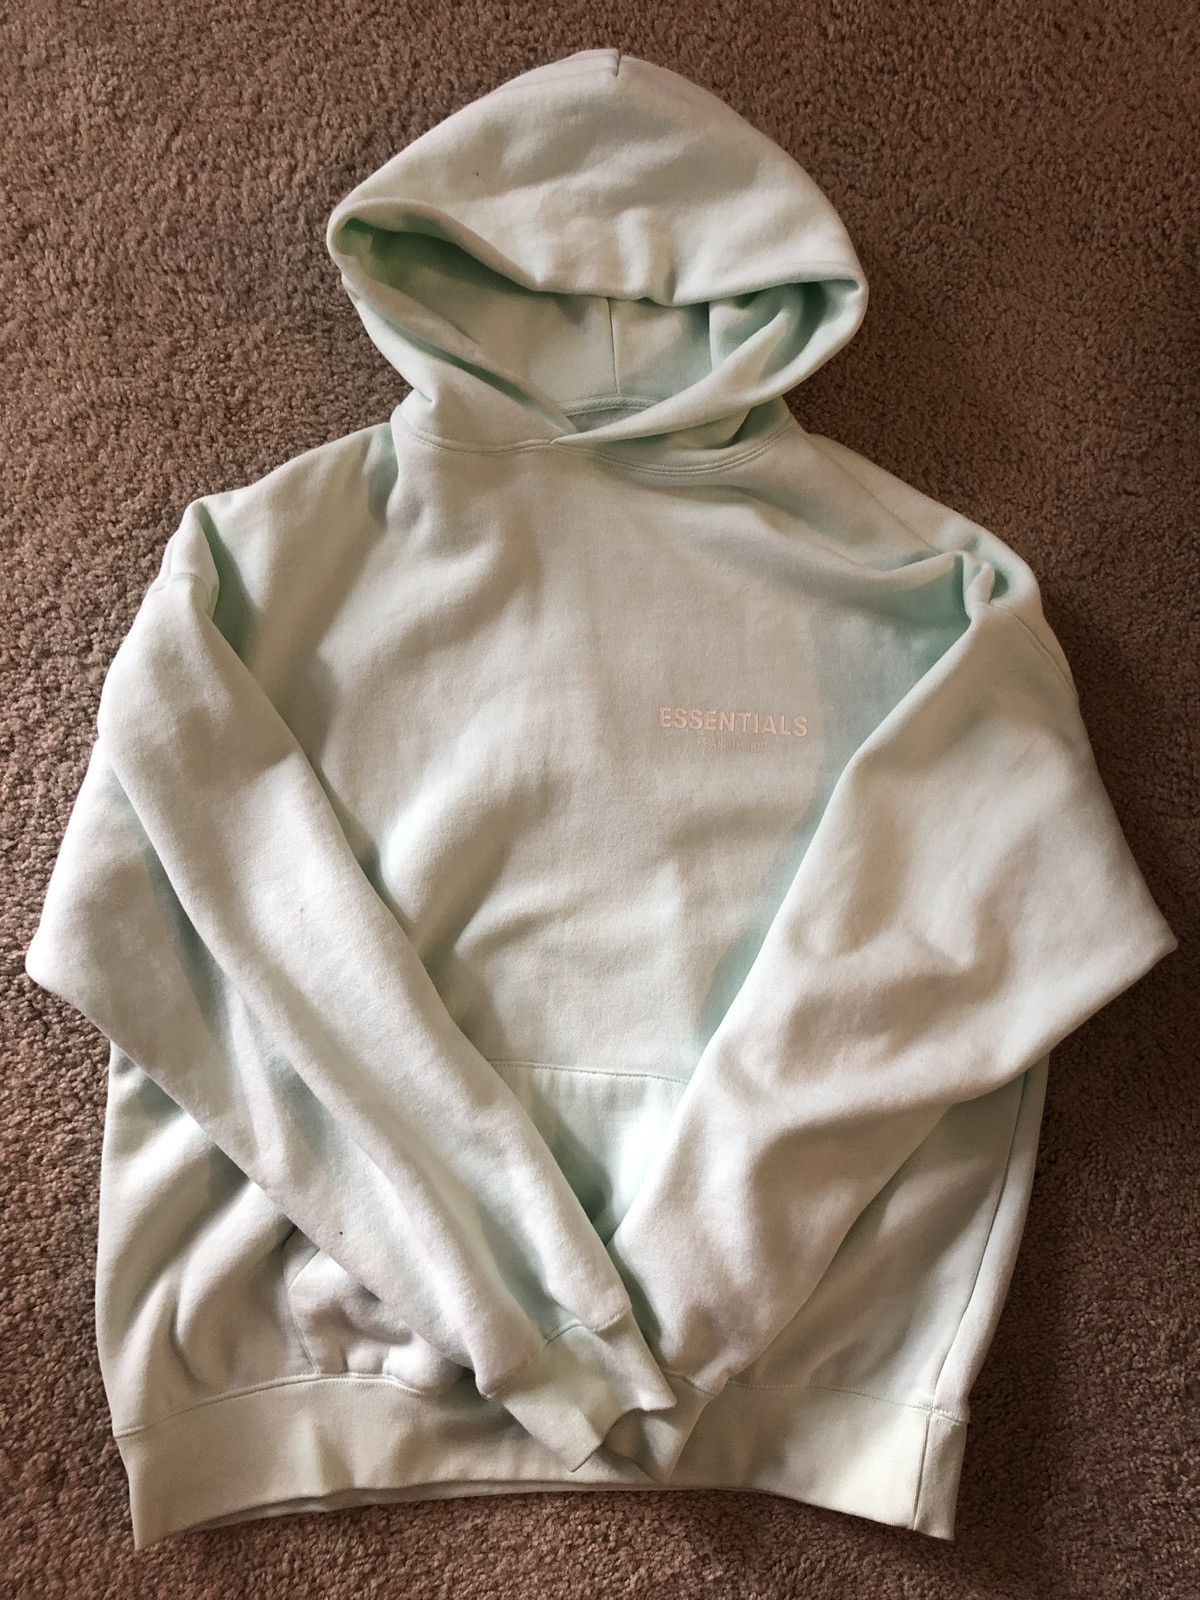 Pacsun Fear of God Essentials Mint Hoodie | Grailed